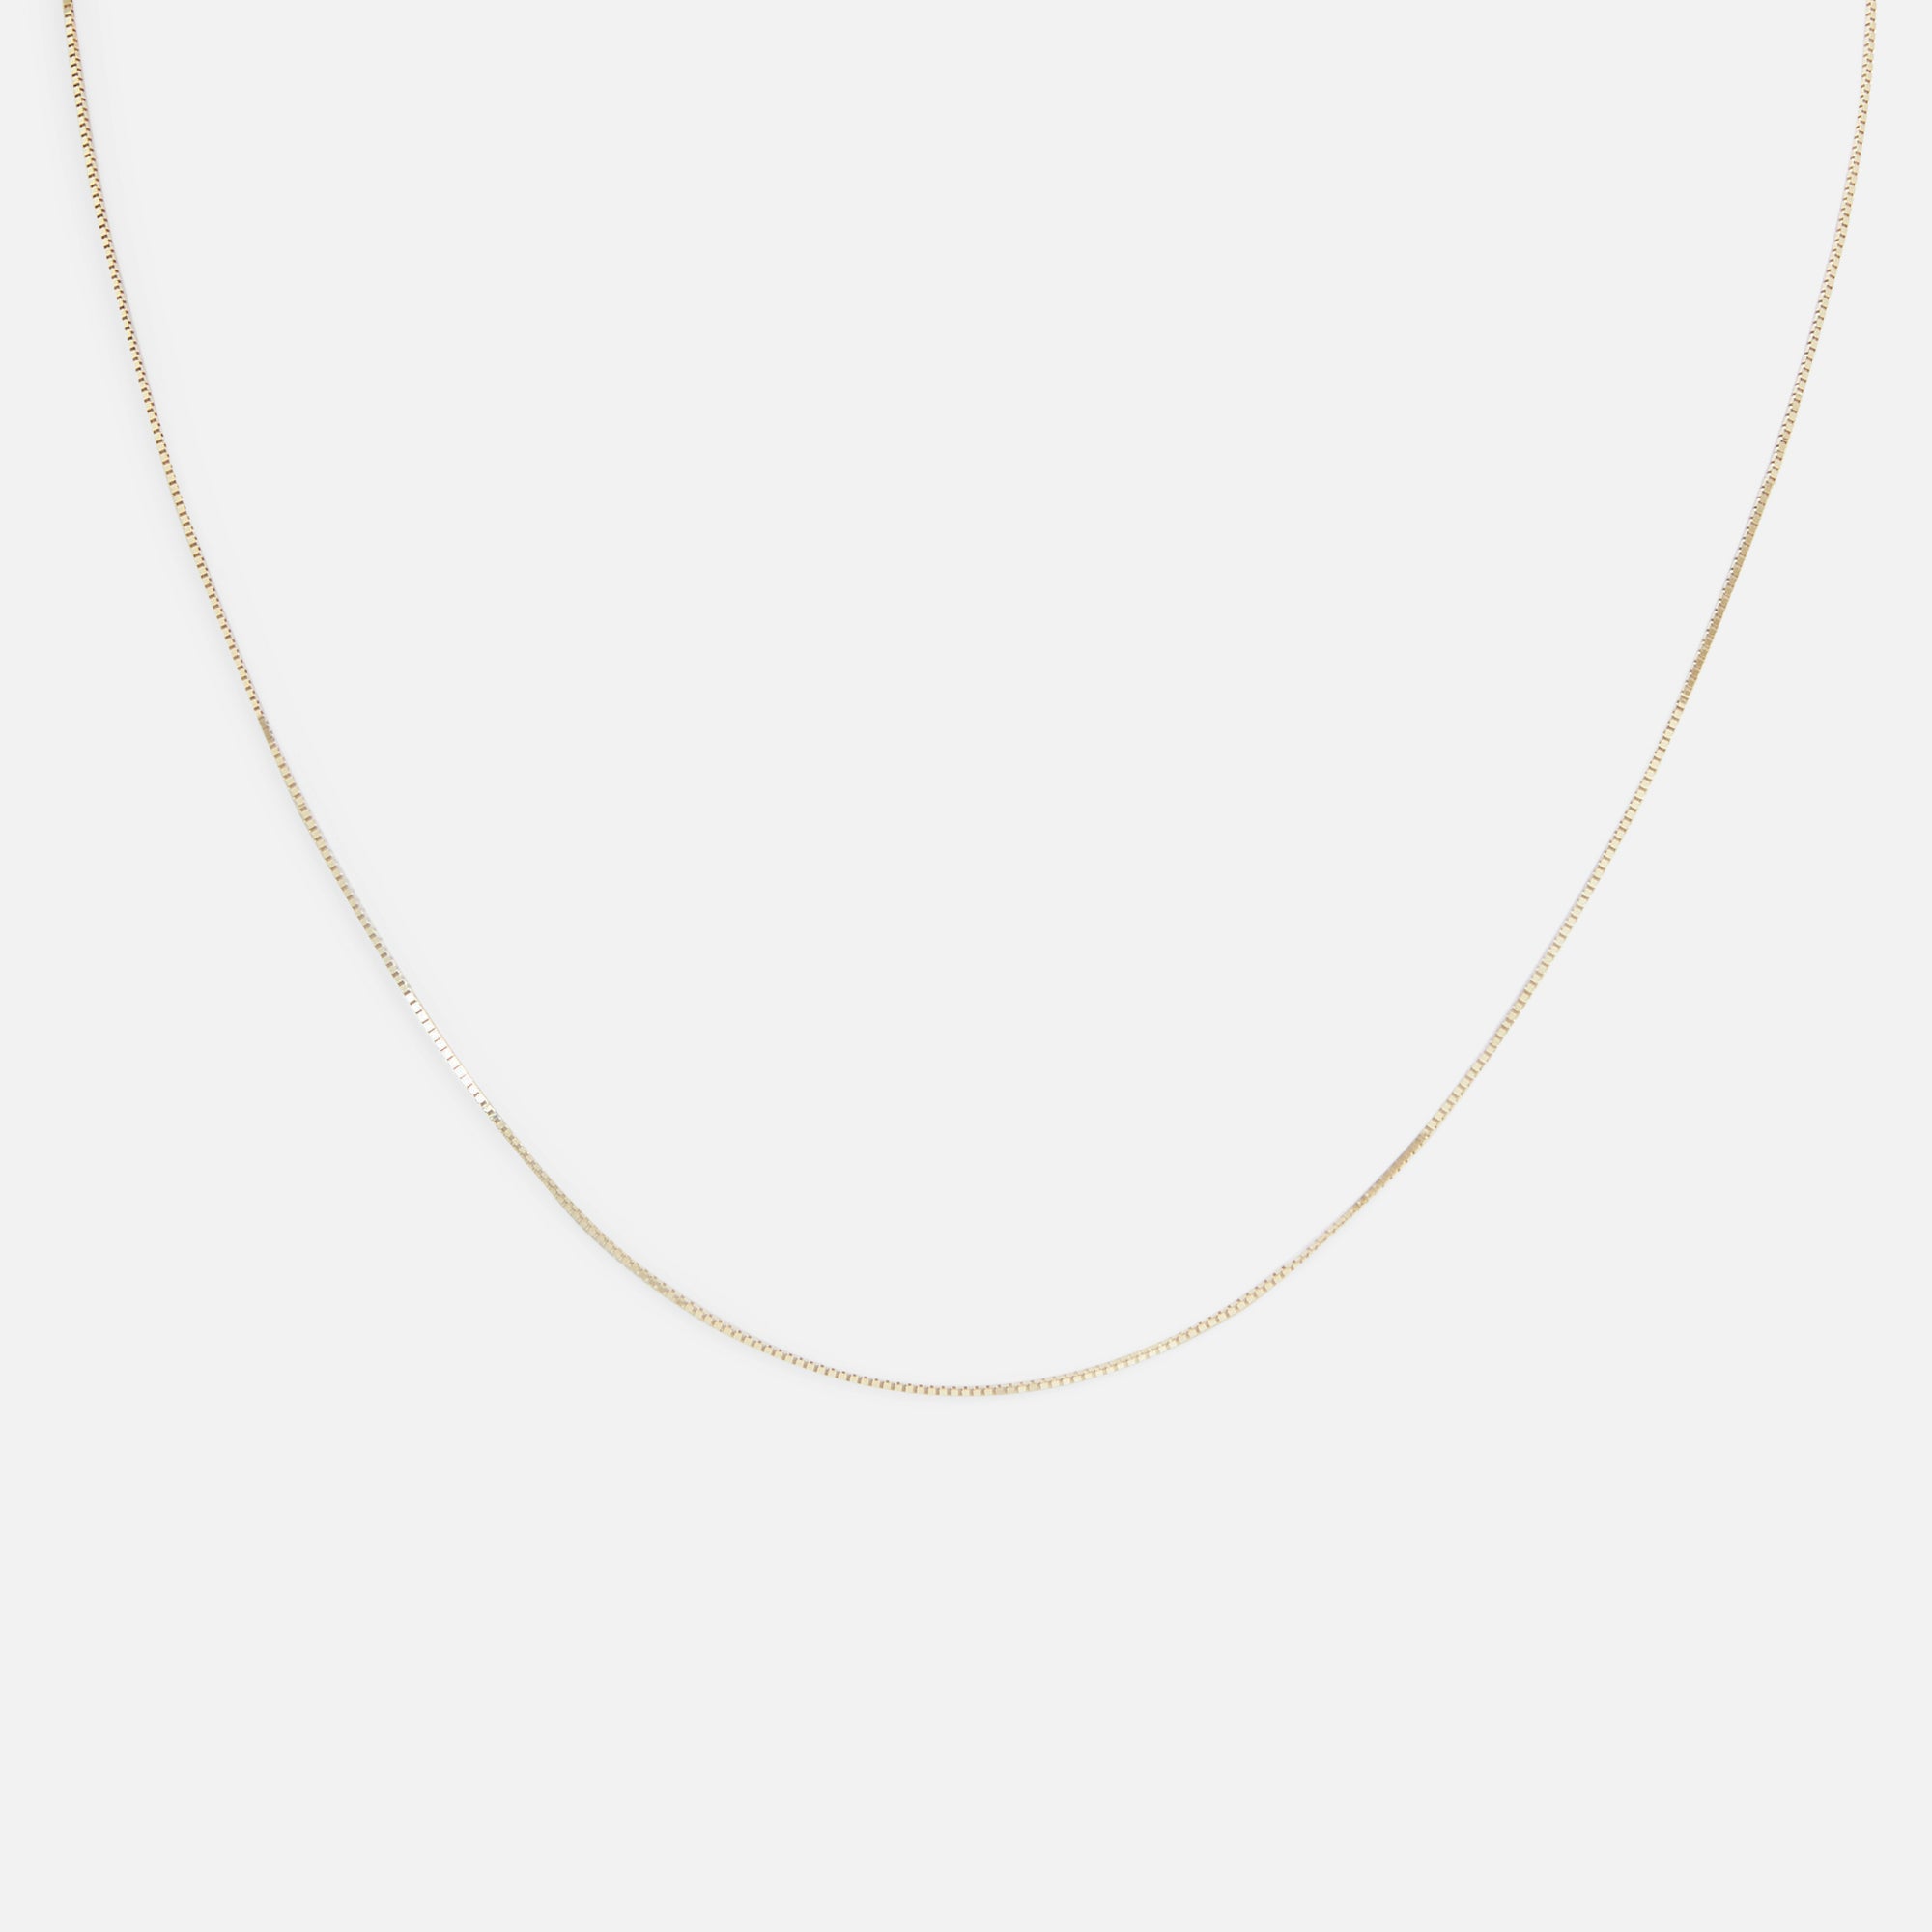 18'' square chain 10k yellow gold